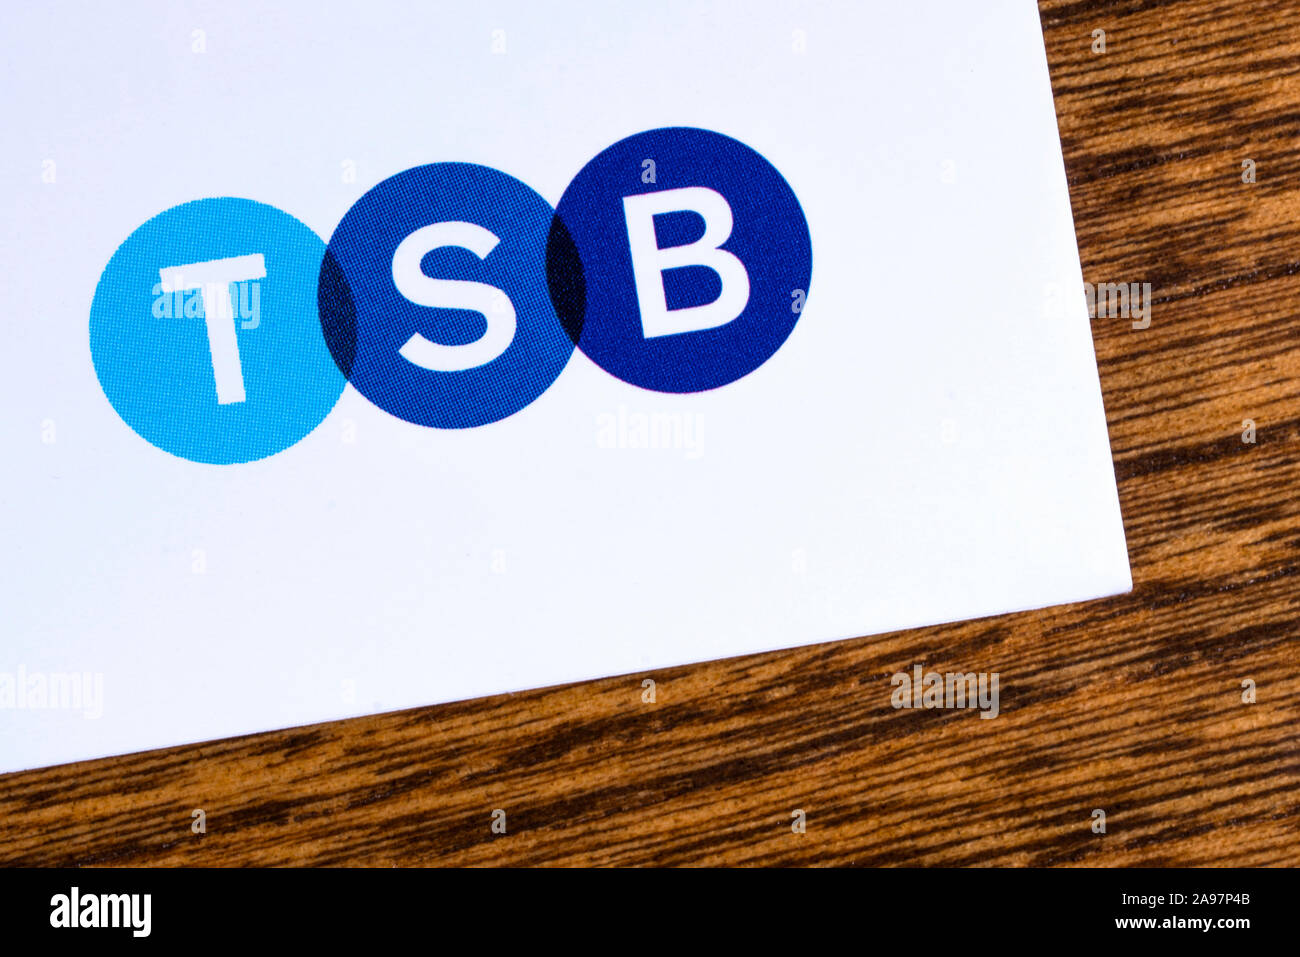 London, UK - March 7th 2019: The logo for TSB bank pictured on the corner of an information leaflet. Stock Photo